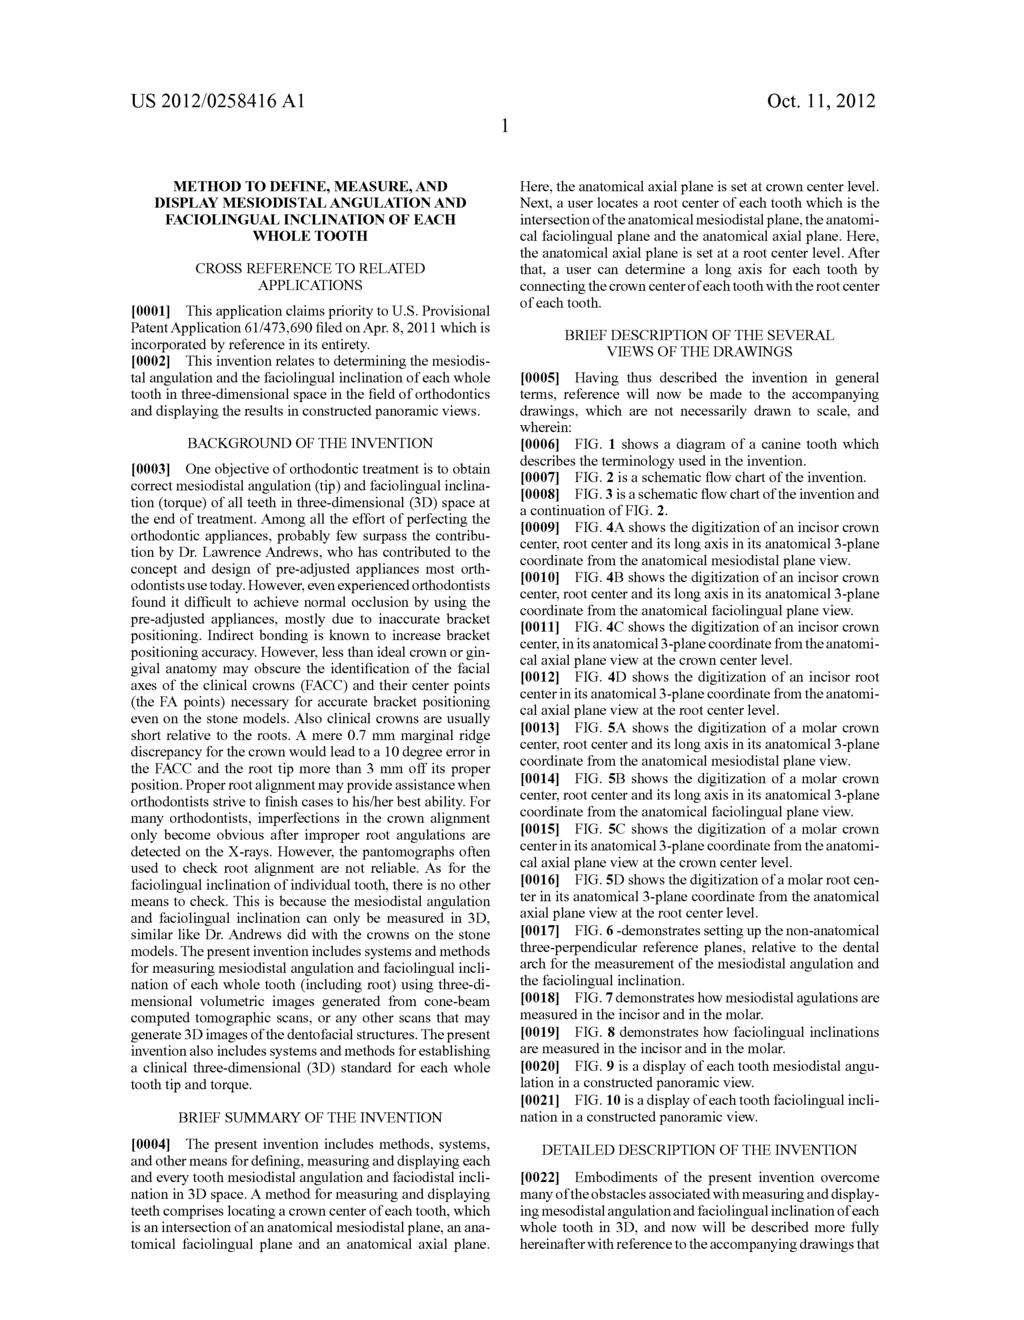 US 2012/025841.6 A1 Oct. 11, 2012 METHOD TO DEFINE, MEASURE, AND DISPLAY MESODSTALANGULATION AND FACOLINGUAL INCLINATION OF EACH WHOLE TOOTH CROSS REFERENCE TO RELATED APPLICATIONS 0001.